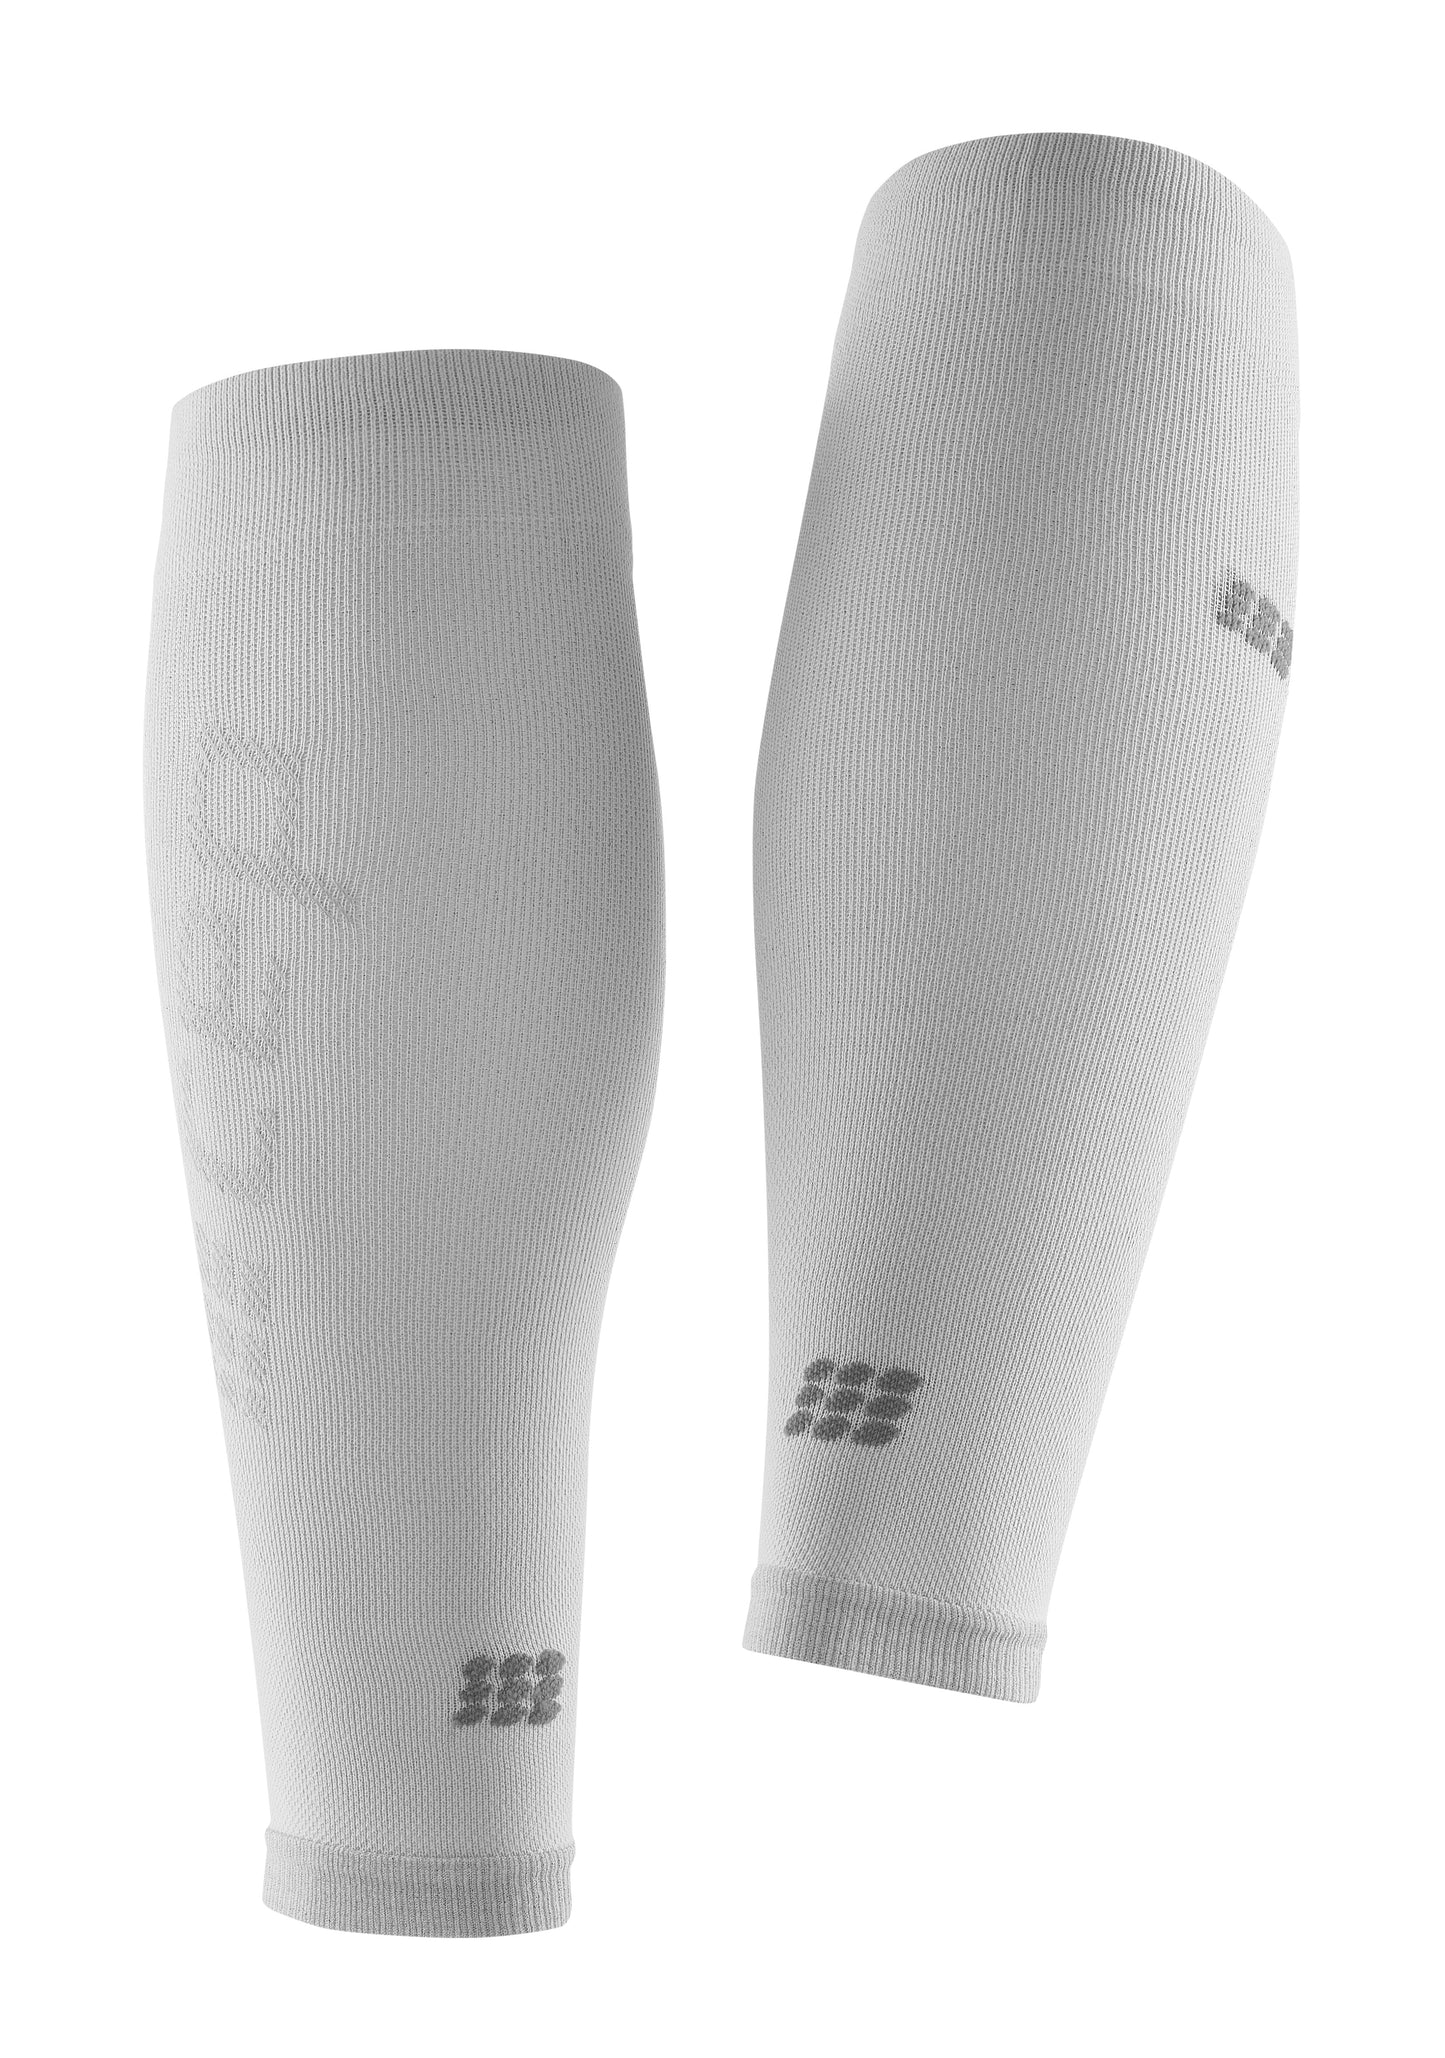 CEP Ultralight Compression Calf Sleeve Women's - Carbon White